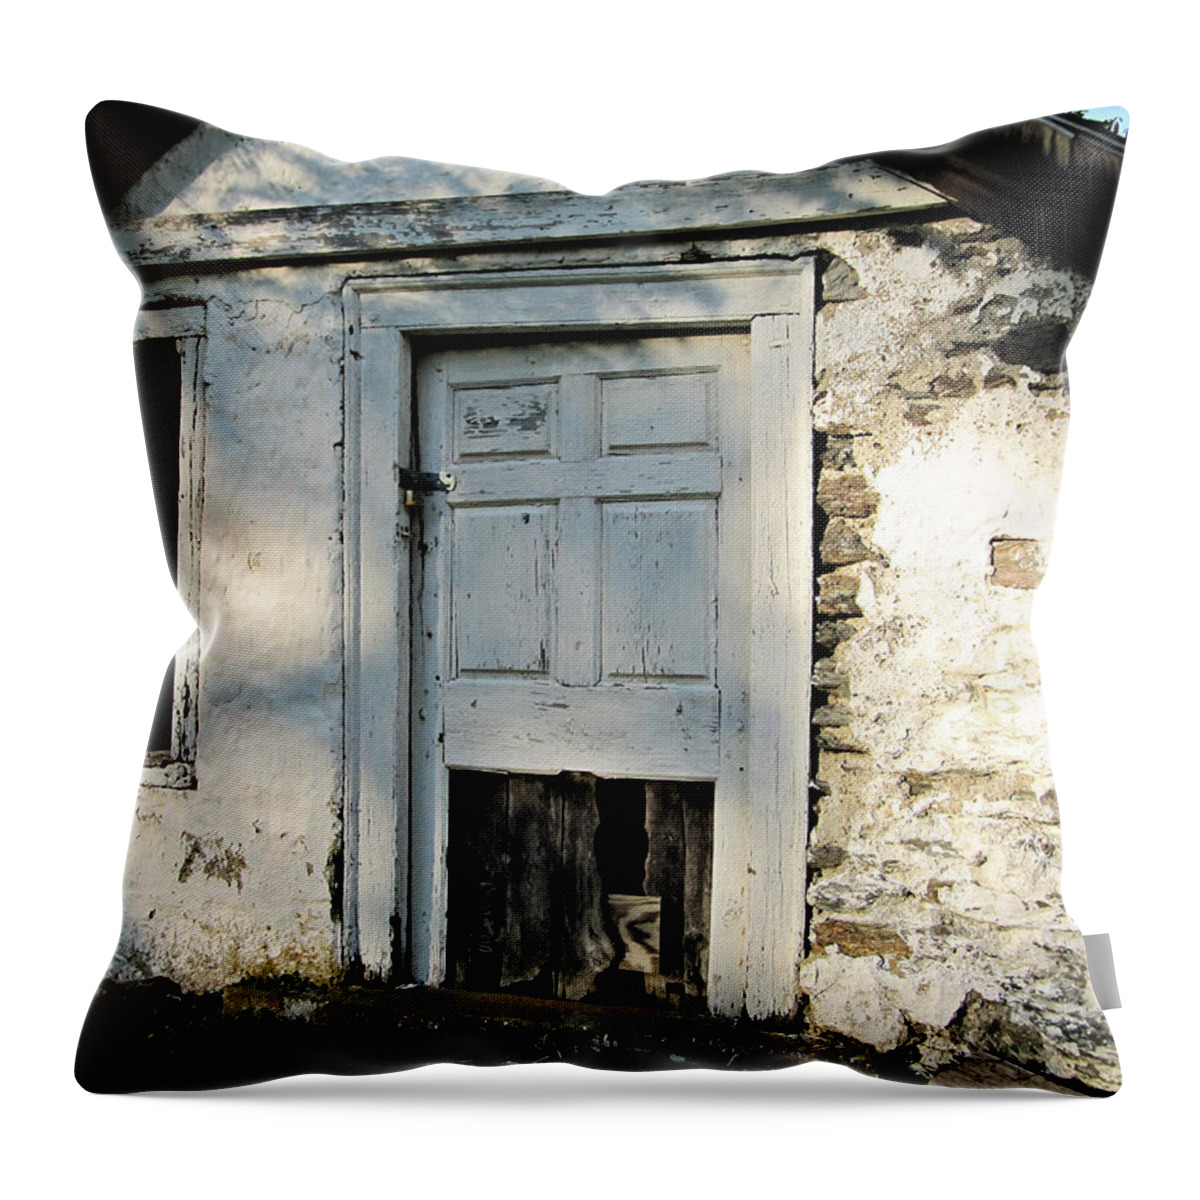 Old Throw Pillow featuring the photograph Old Pump House by Richard Reeve